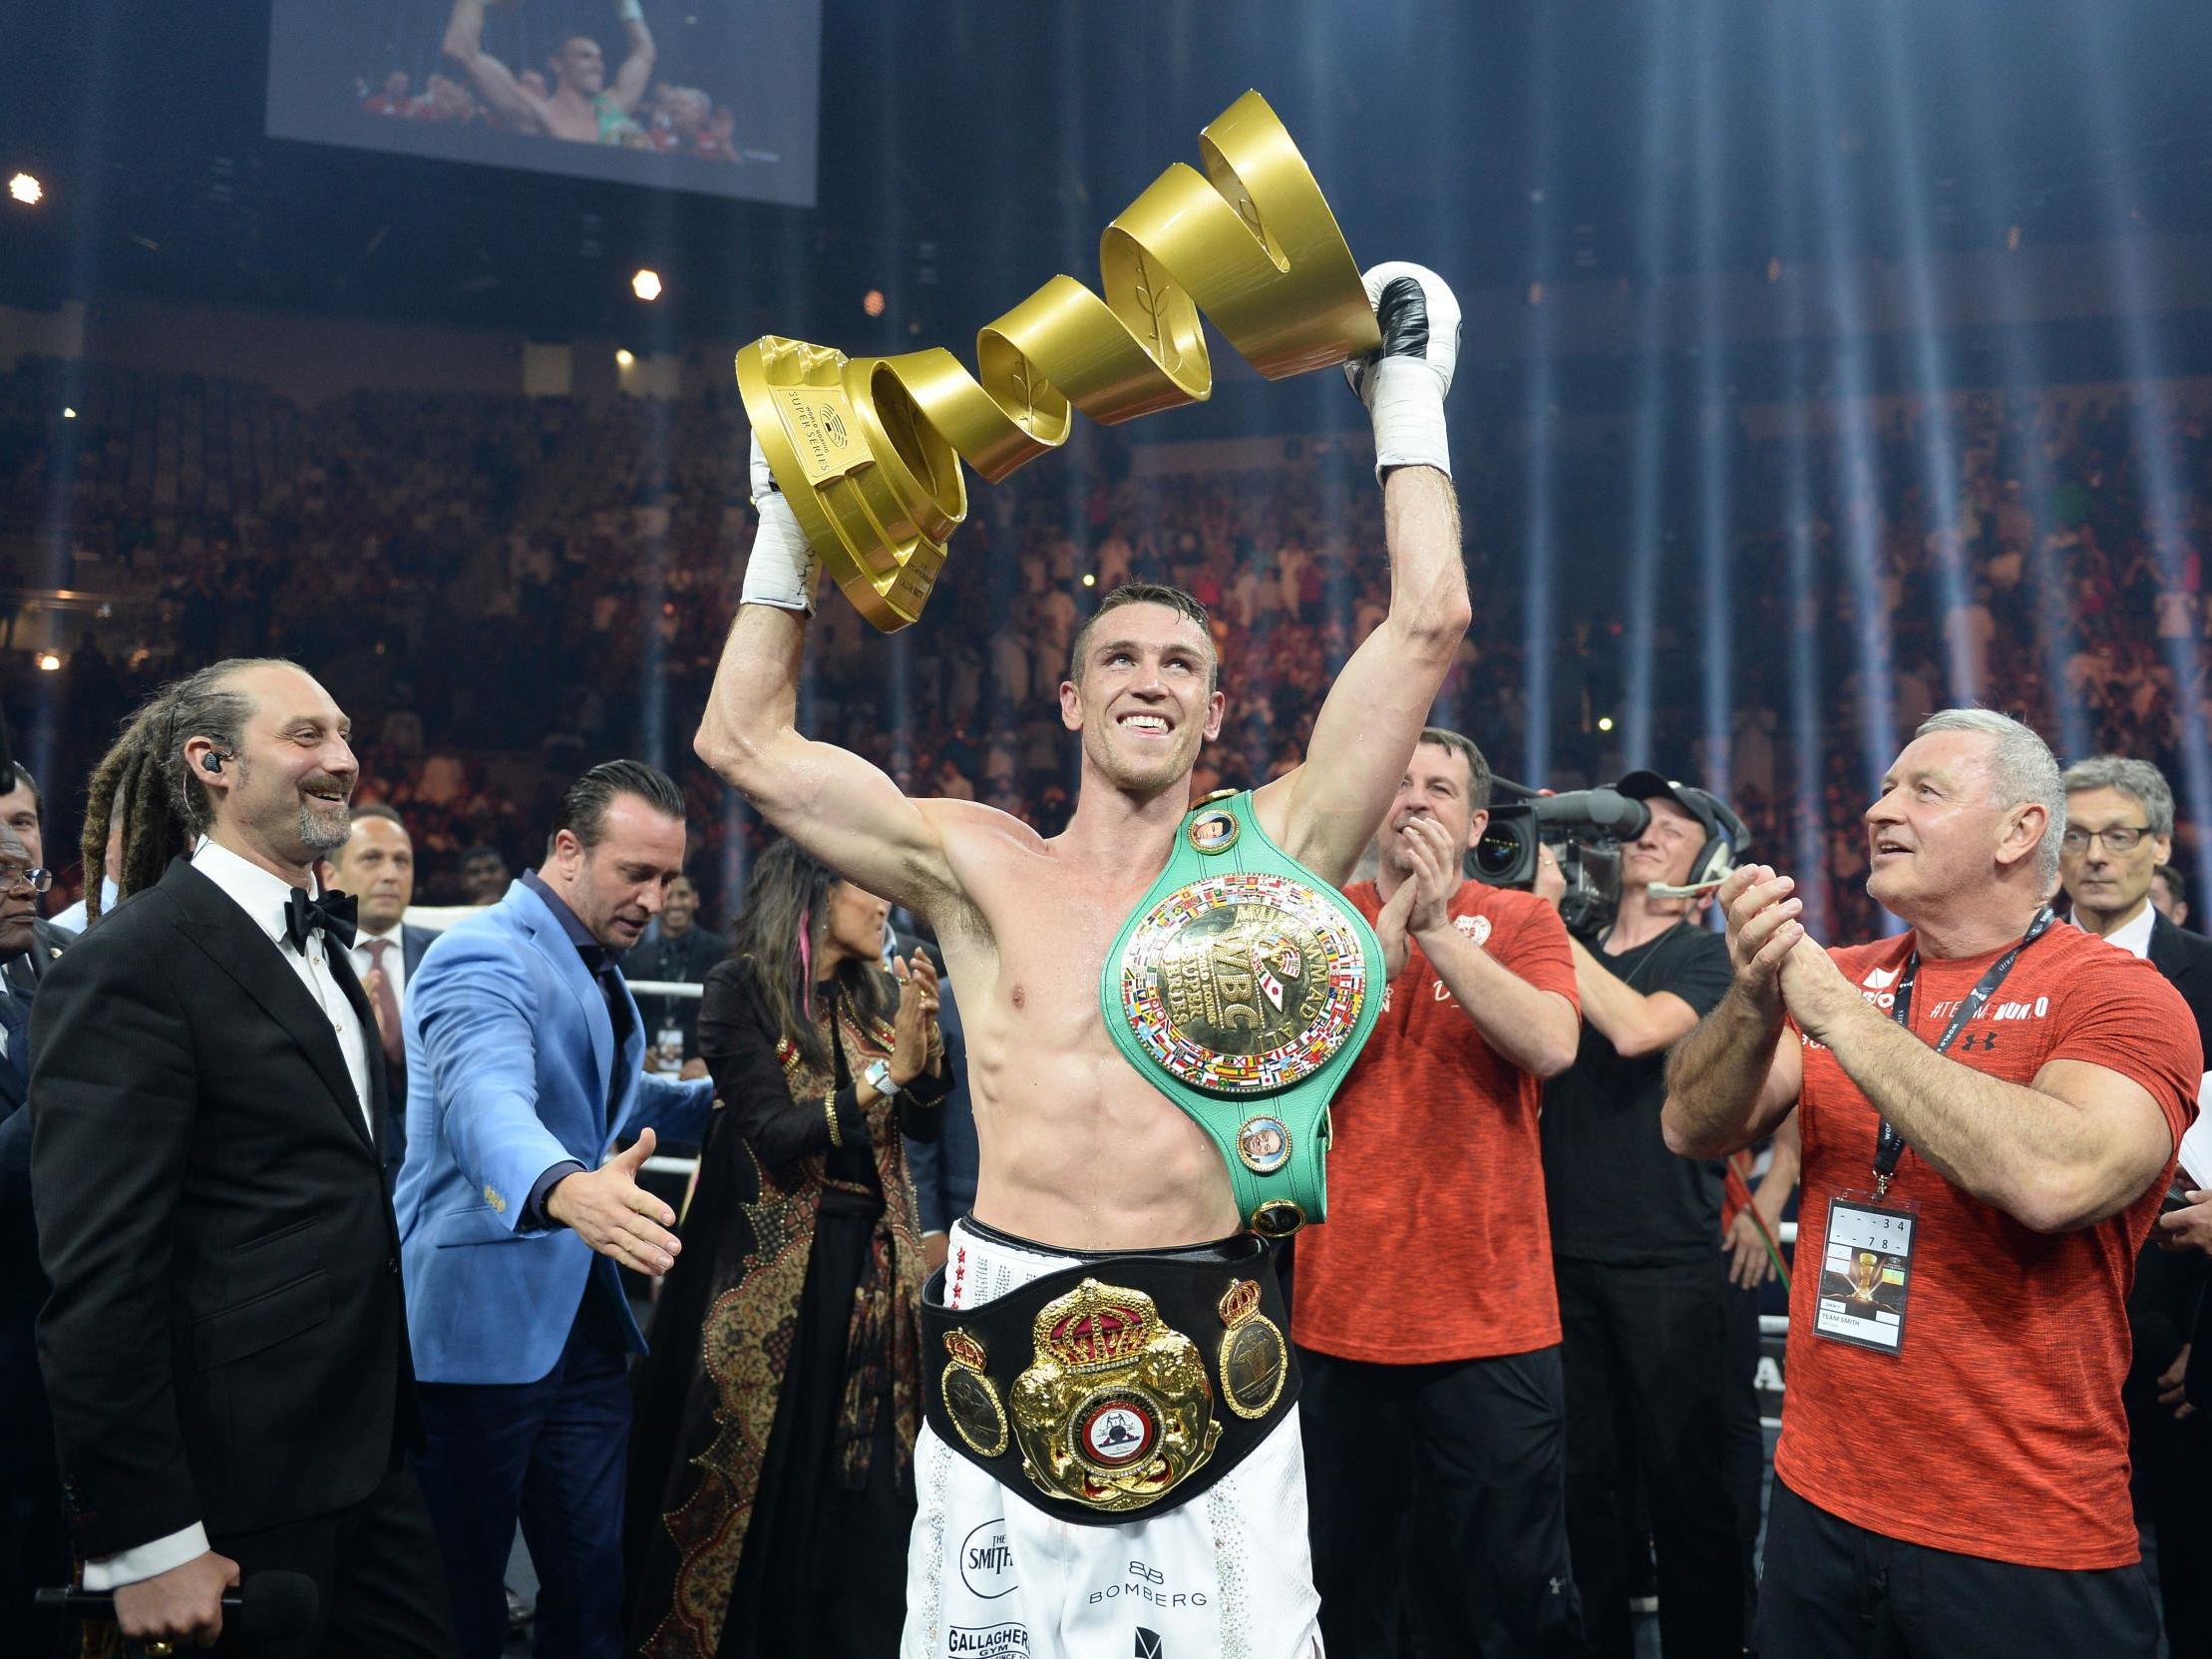 Callum Smith was too big, too fresh, too powerful for his opponent